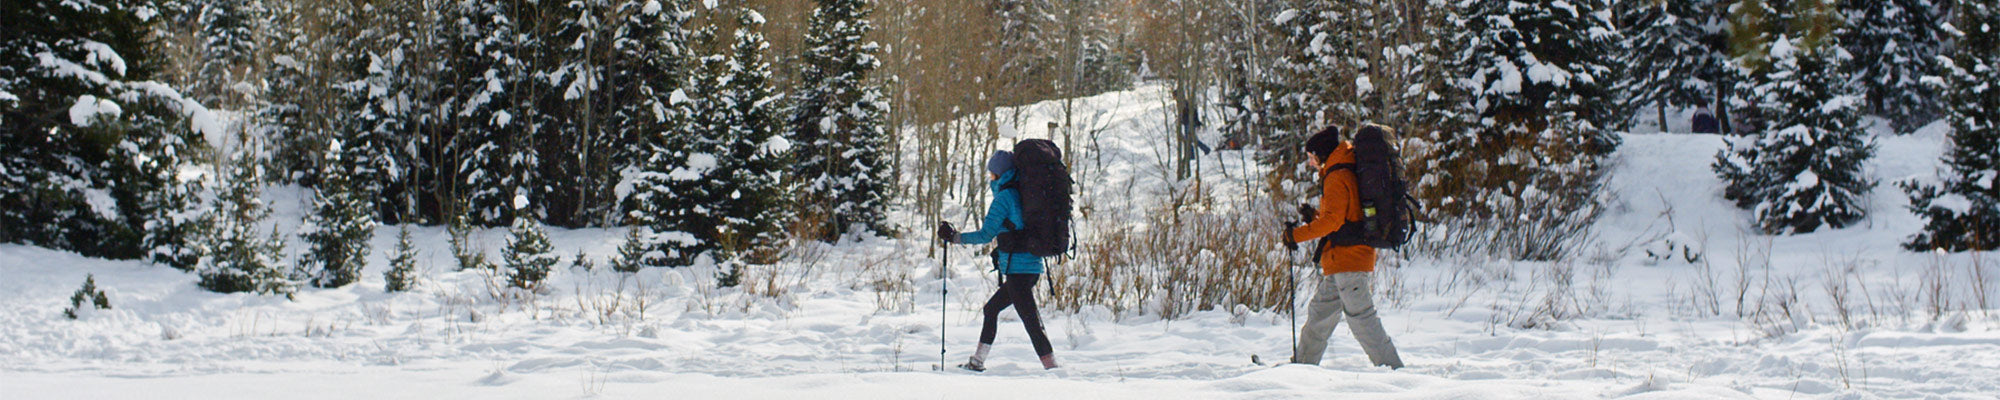 Two people snowshow together through a snowy forest while wearing TETON Sports Backpacks.